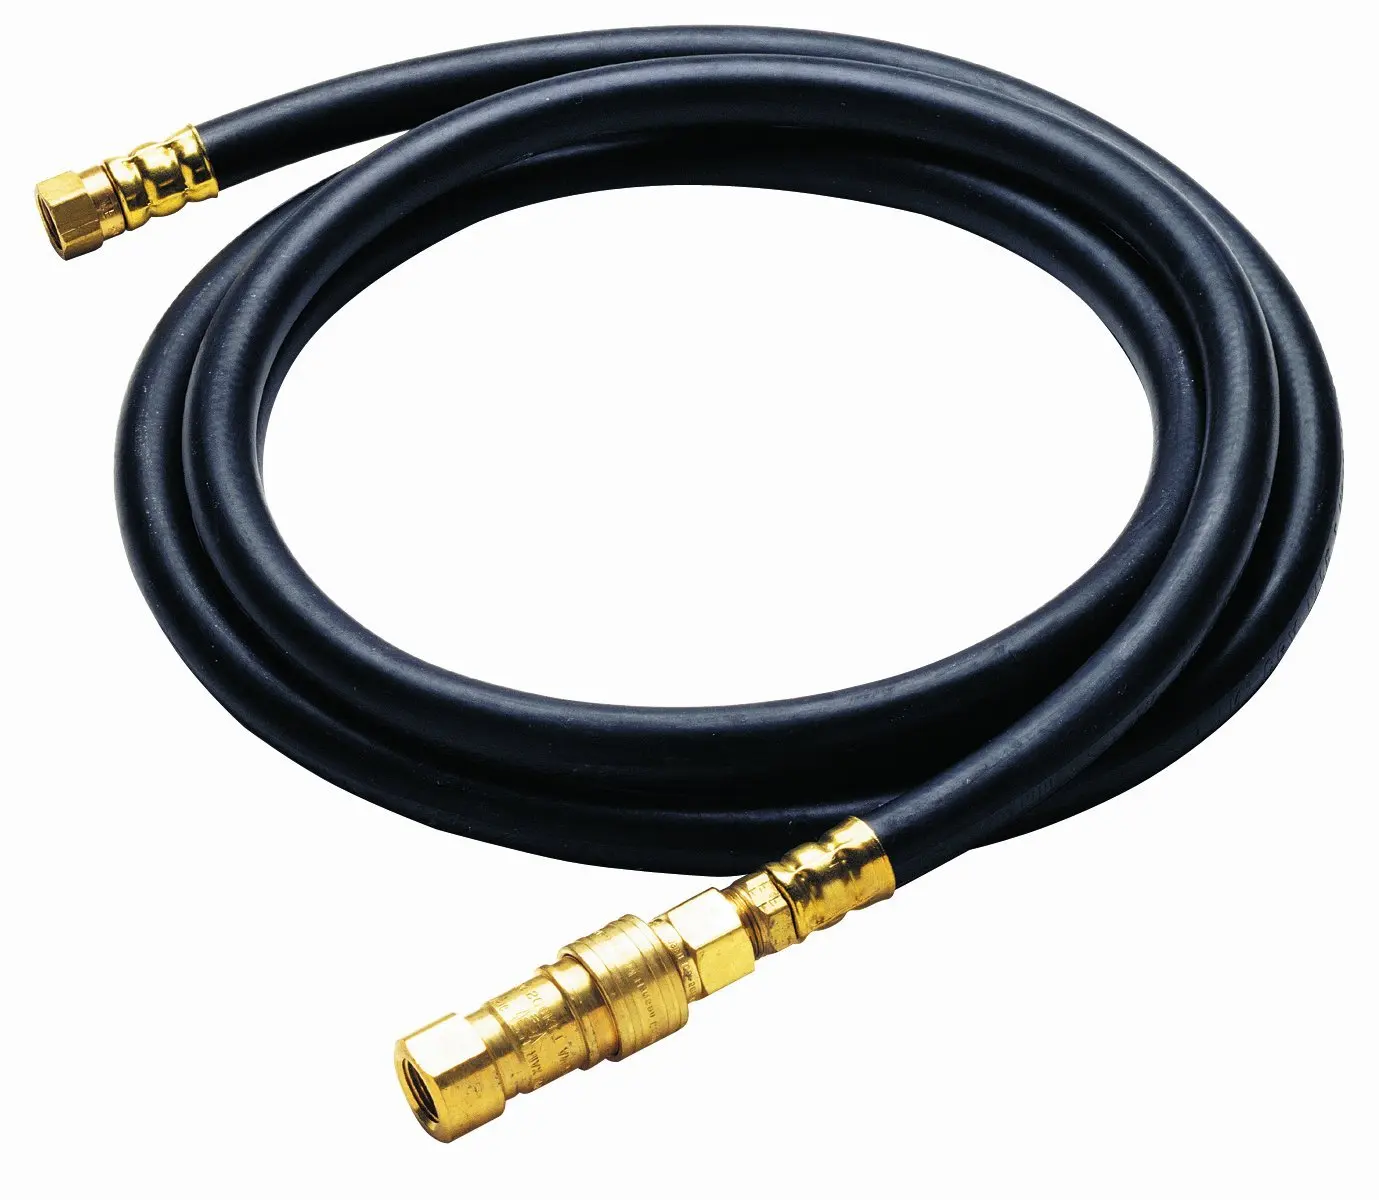 Buy GrillPro 82110 10-Foot Natural Gas Hose with Quick ...